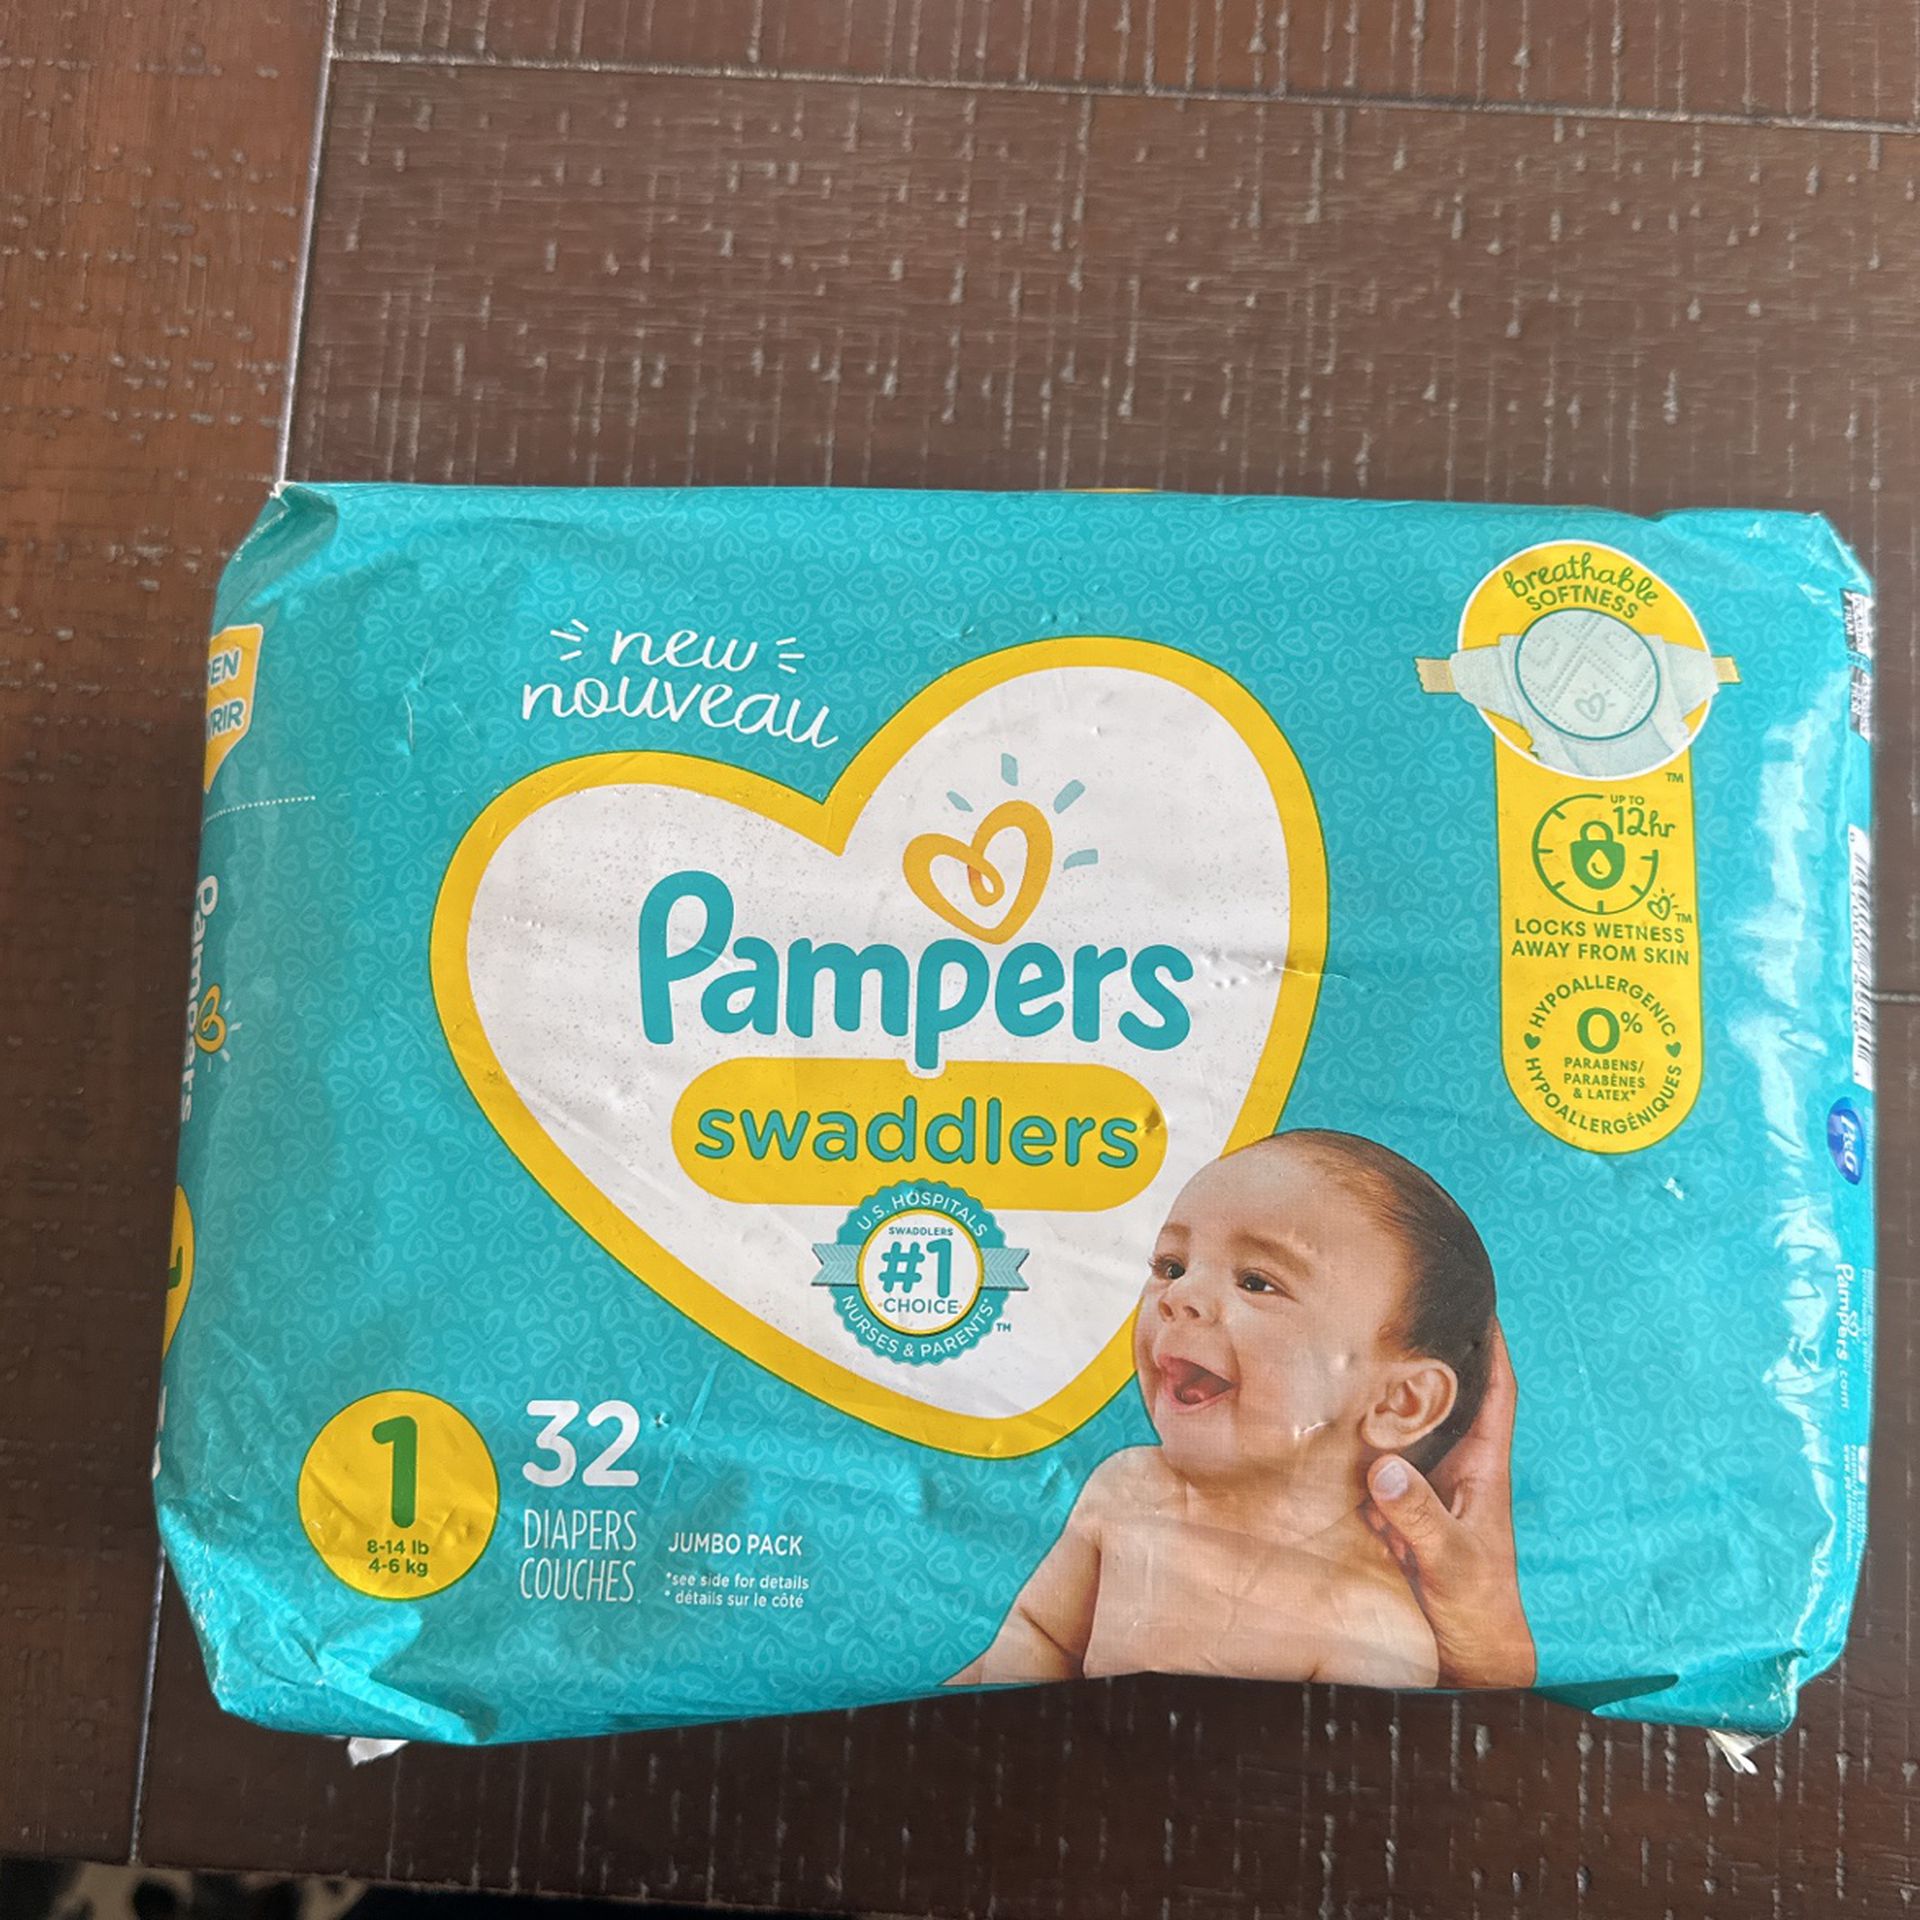 Pampers Swaddlers